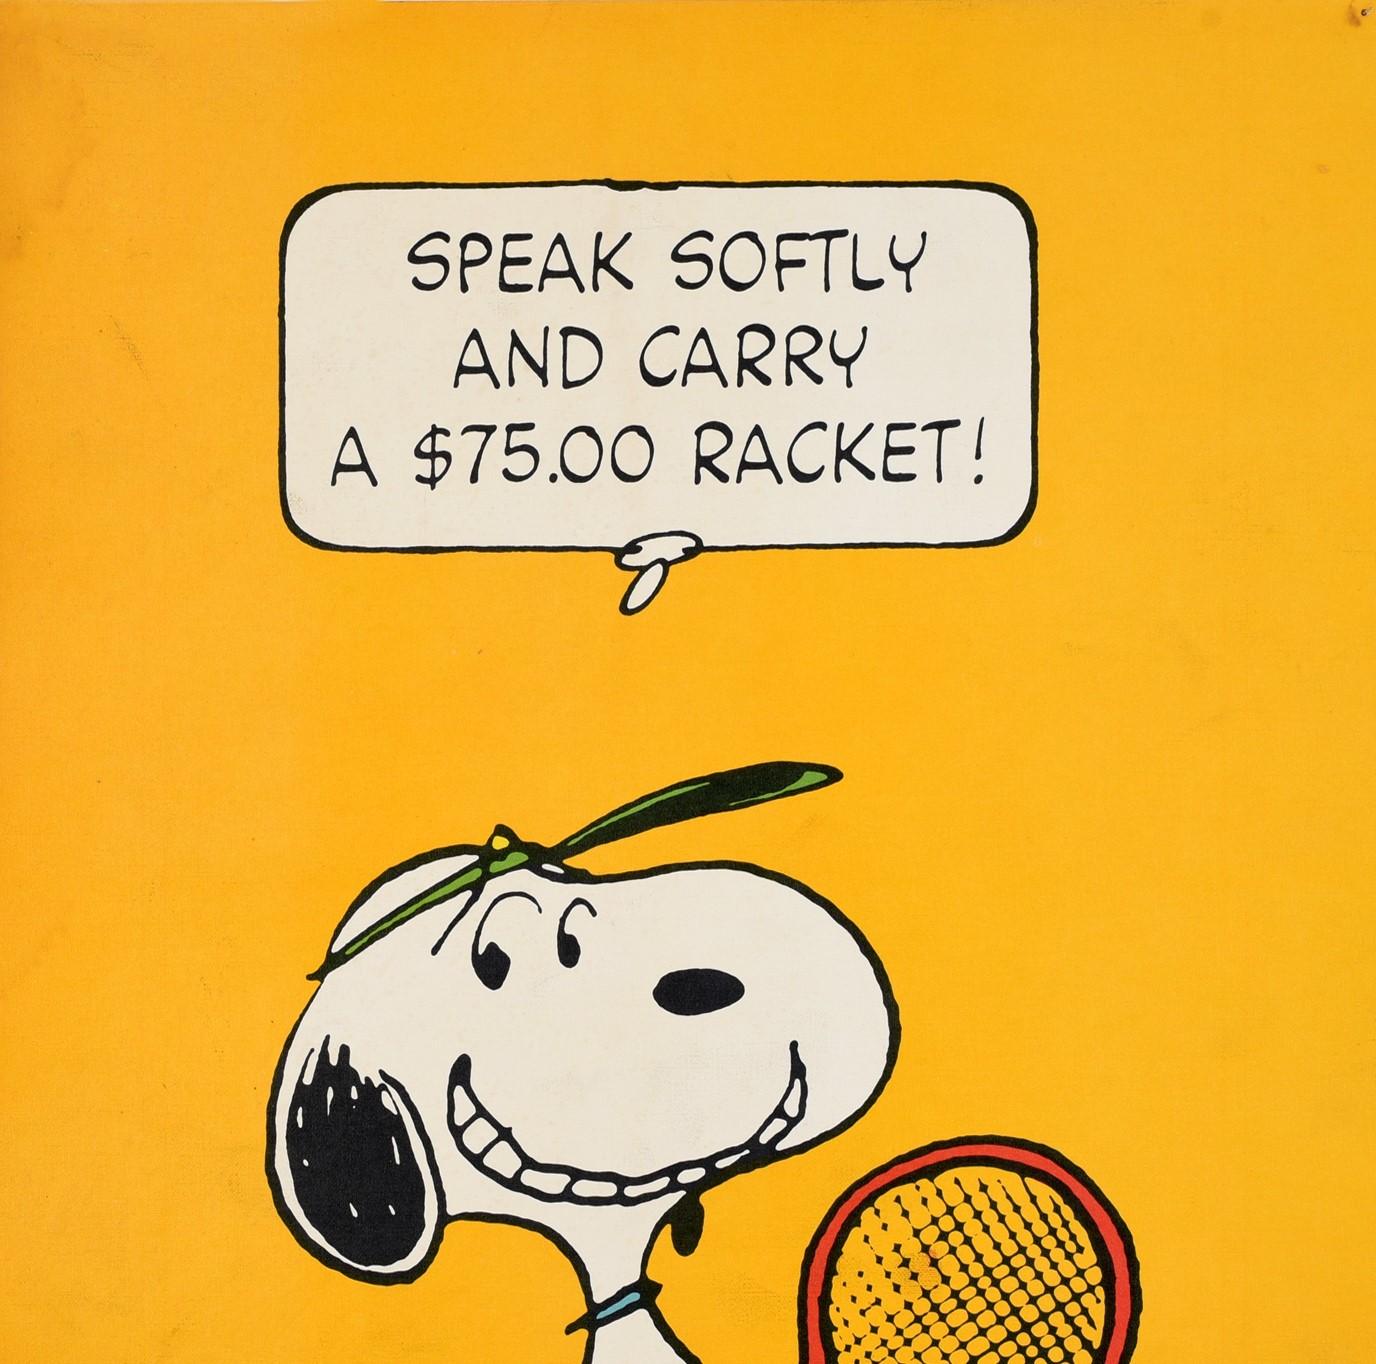 Original Vintage Snoopy Poster Tennis Cartoon Speak Softy And Carry A $75 Racket - Print by Charles M. Schulz